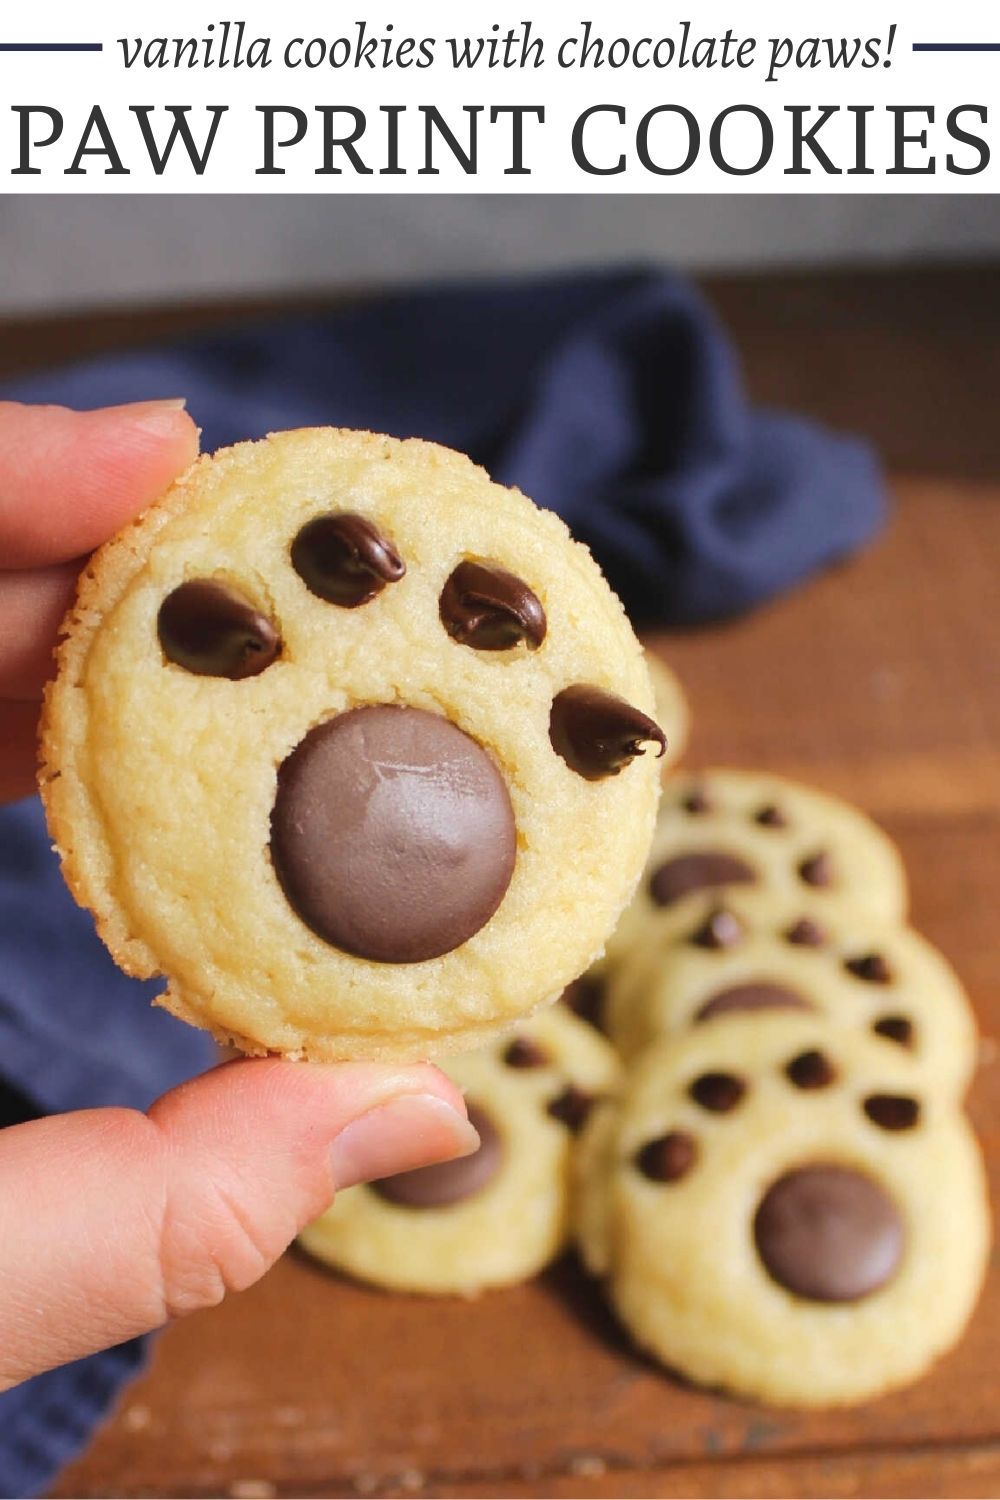 Vanilla paw print cookies are as tasty as they are cute. They are built on a melt in your mouth butter cookie with tasty chocolate paws on top.